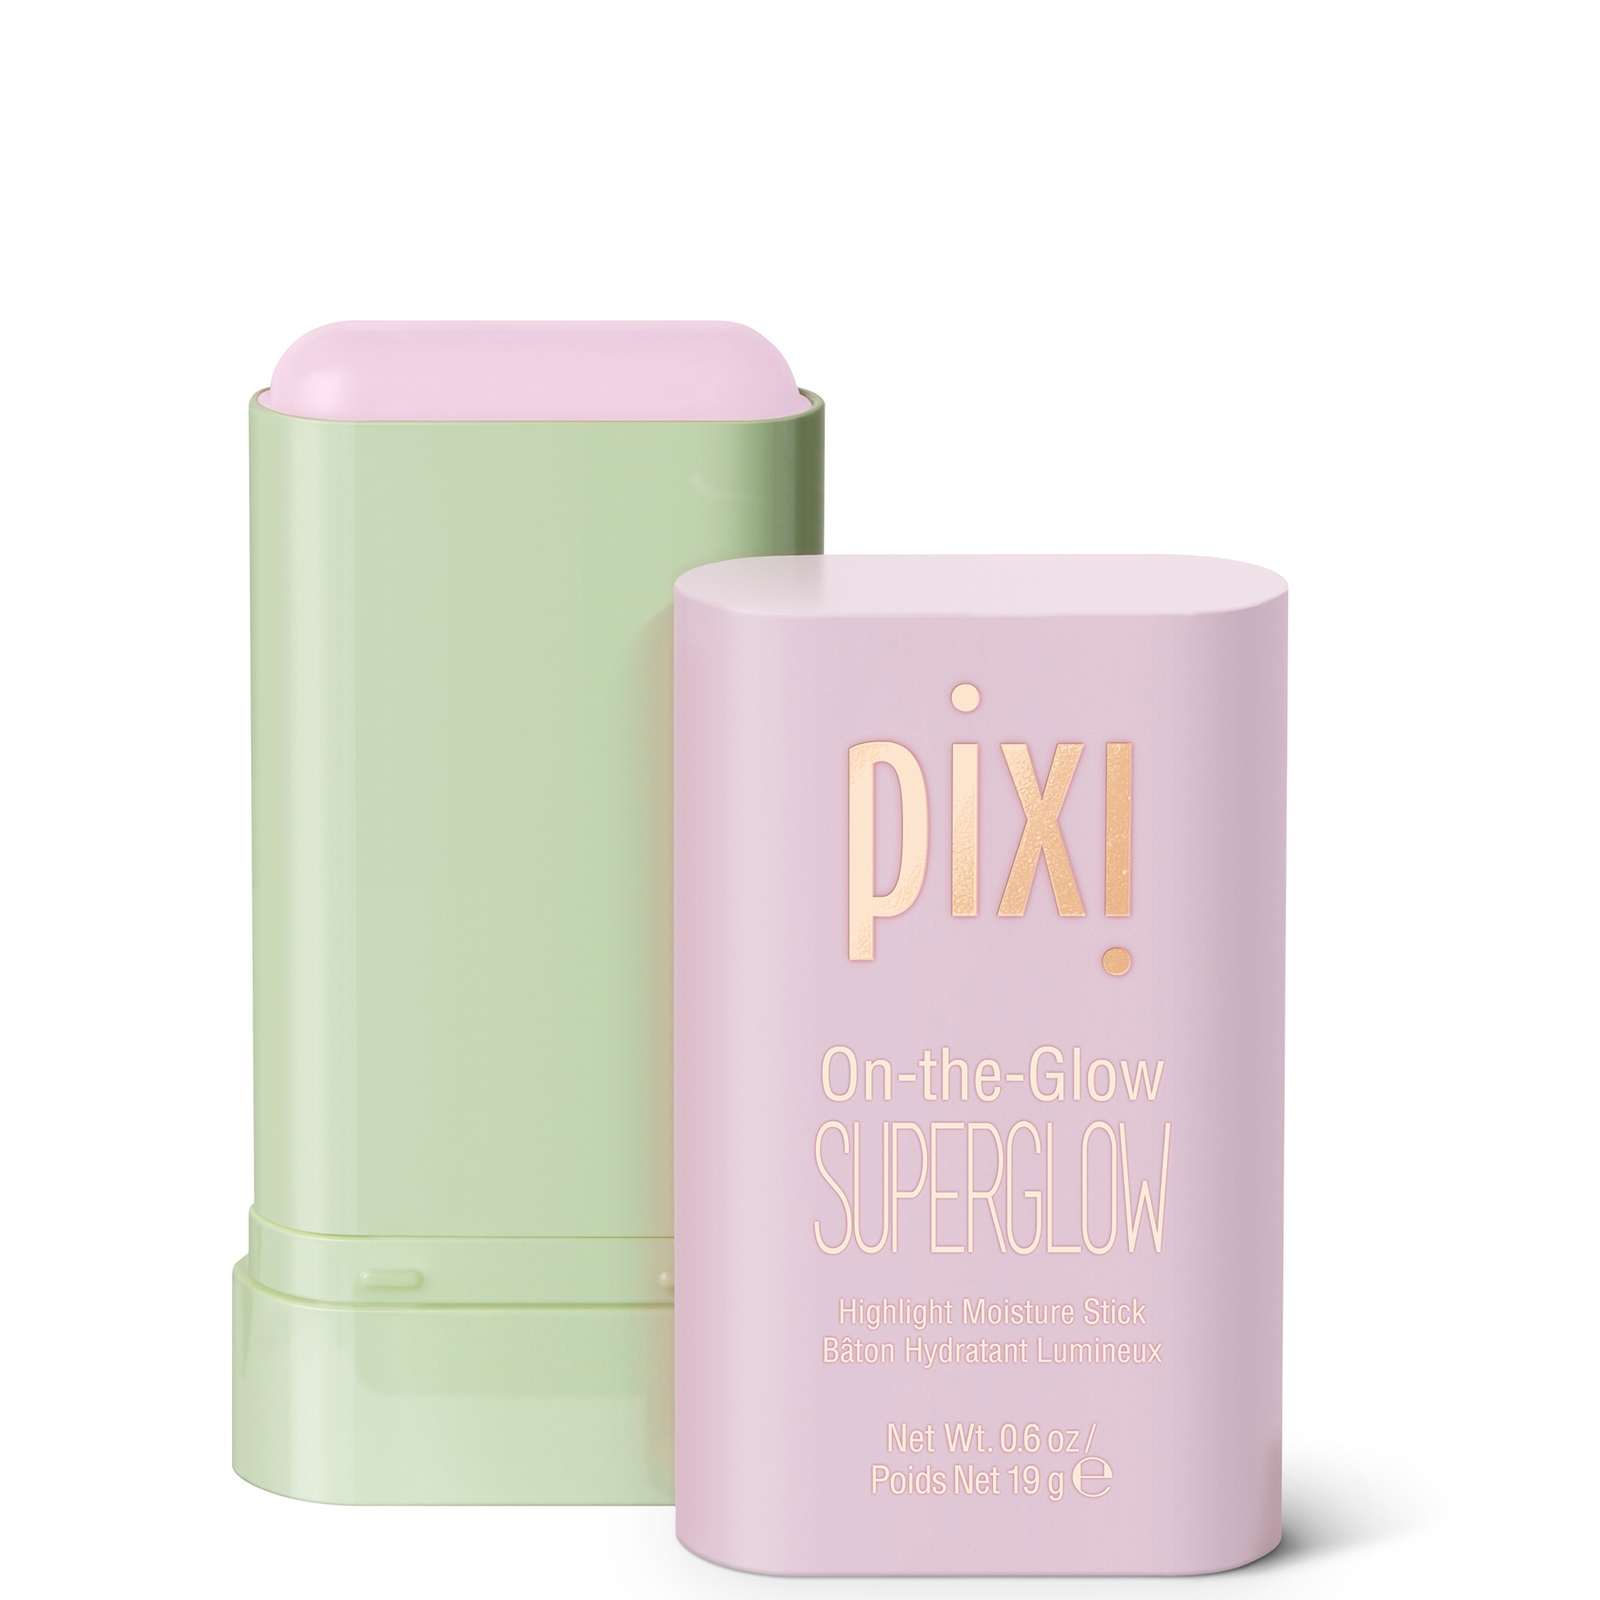 Pixi On-the-glow Superglow Highlighter 19g (various Shades) - Petaldew In White